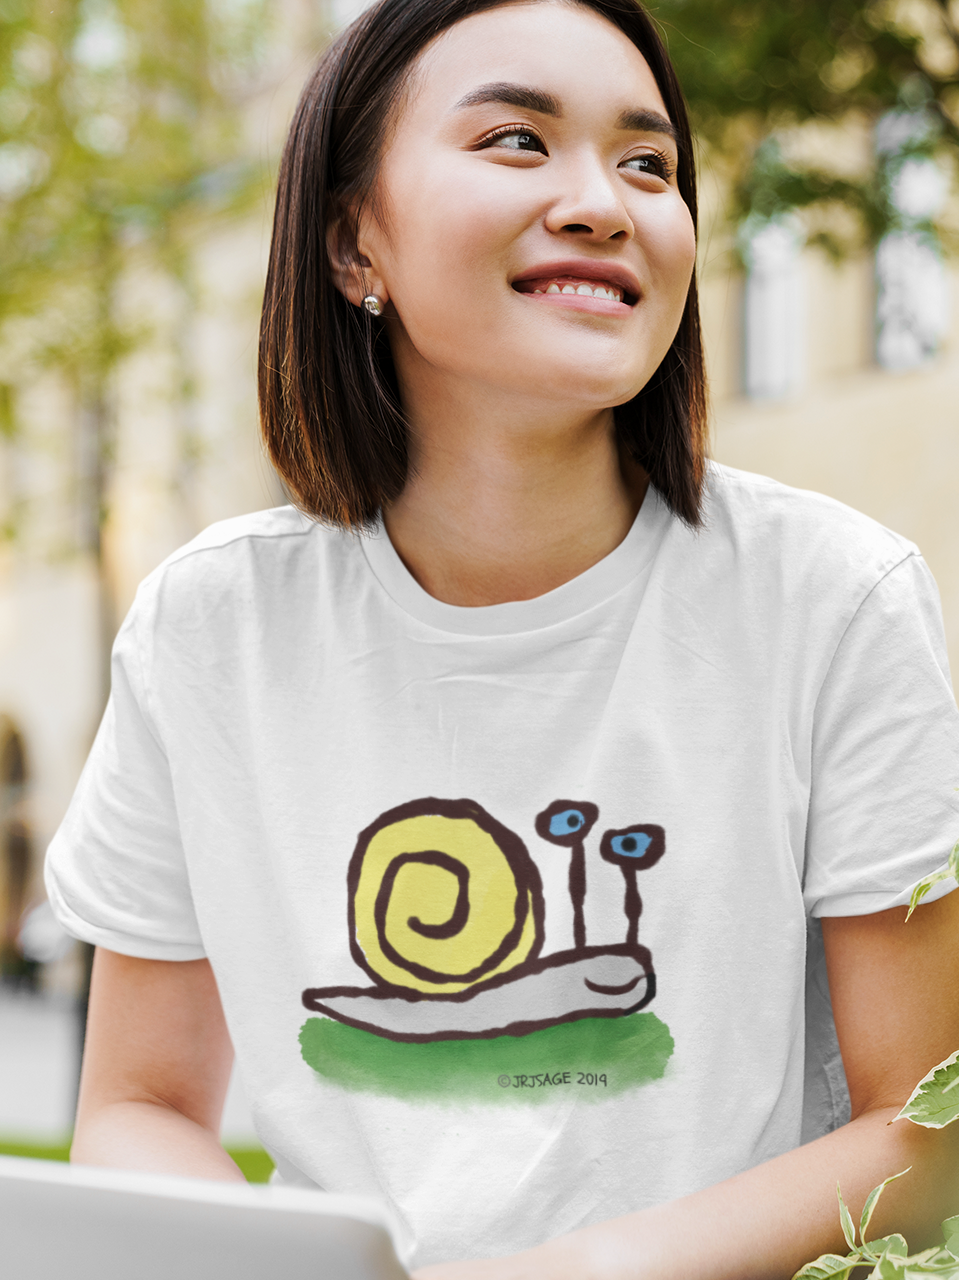 Snail T-shirt - A young woman wearing a Unisex Hector and Bone vegan cotton T-shirt with printed cute Snail illustration